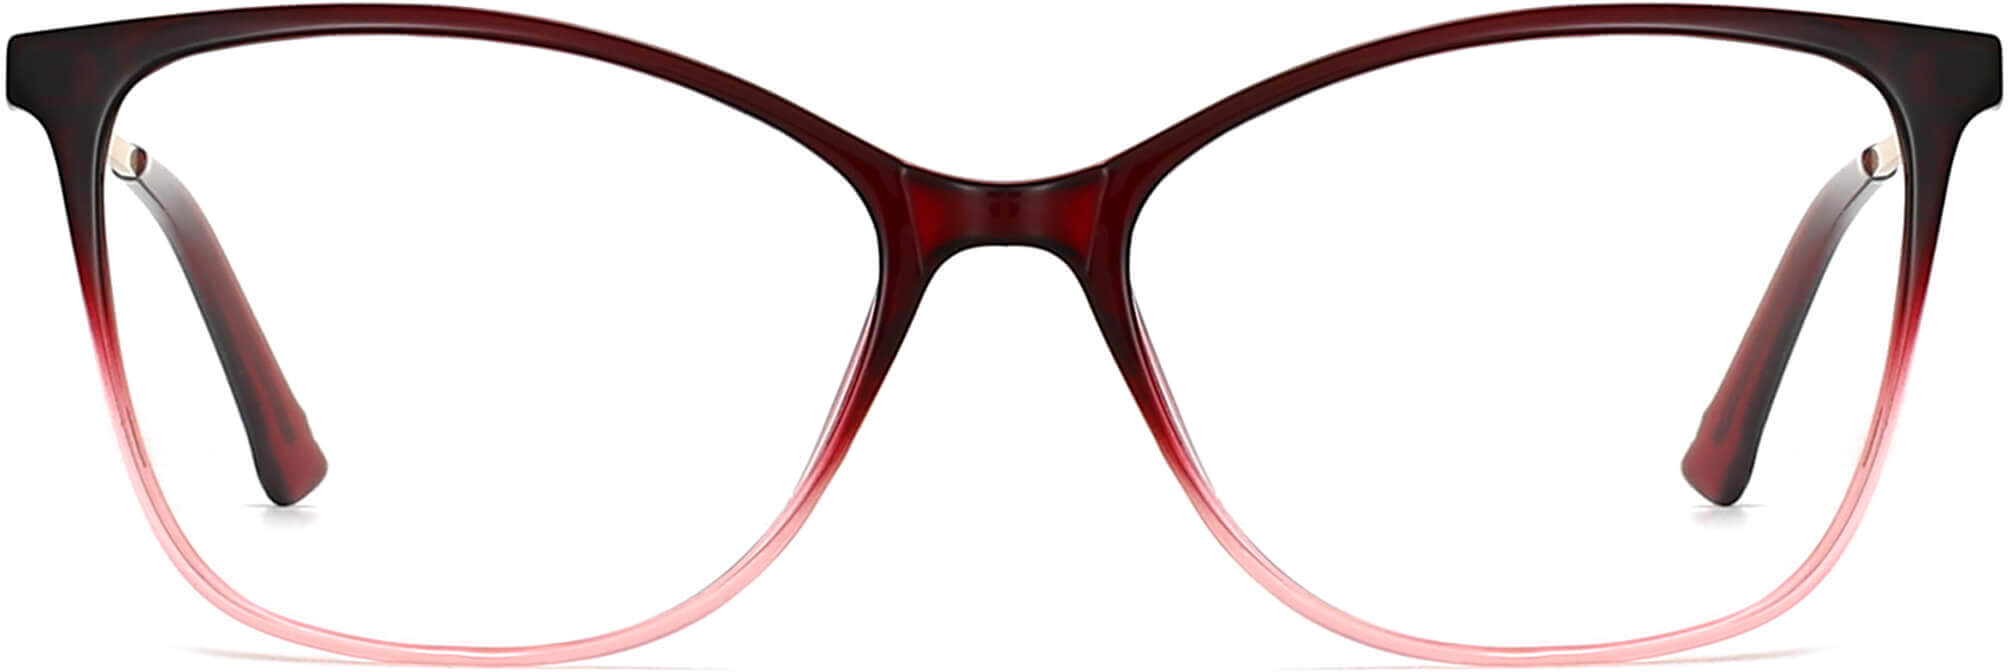 Kristen Cateye Red Eyeglasses from ANRRI, front view